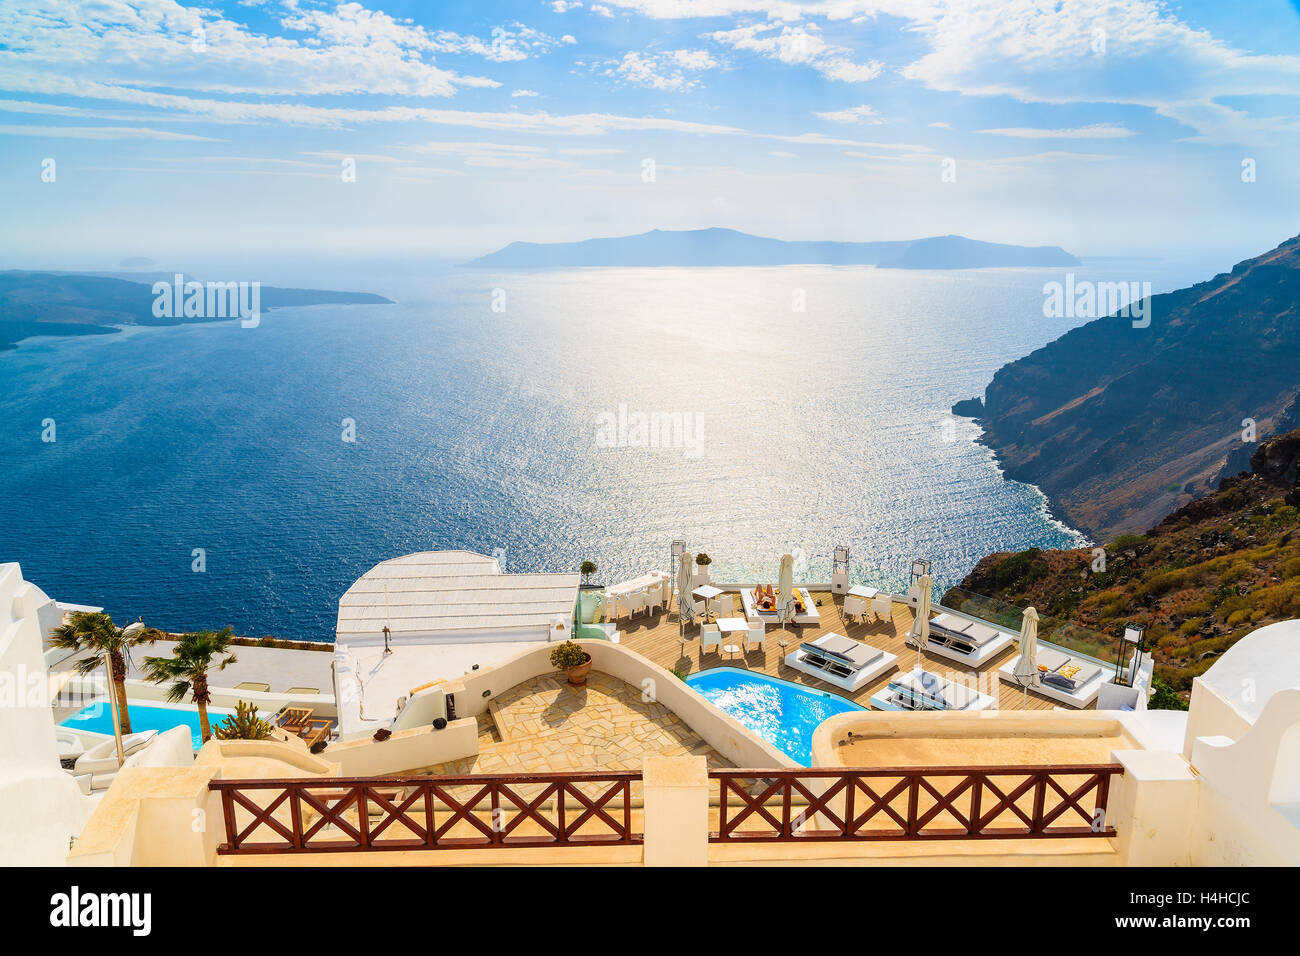 A view of beautiful sea and caldera with luxury hotel buildings, typical white architecture of Santorini island, Greece Stock Photo